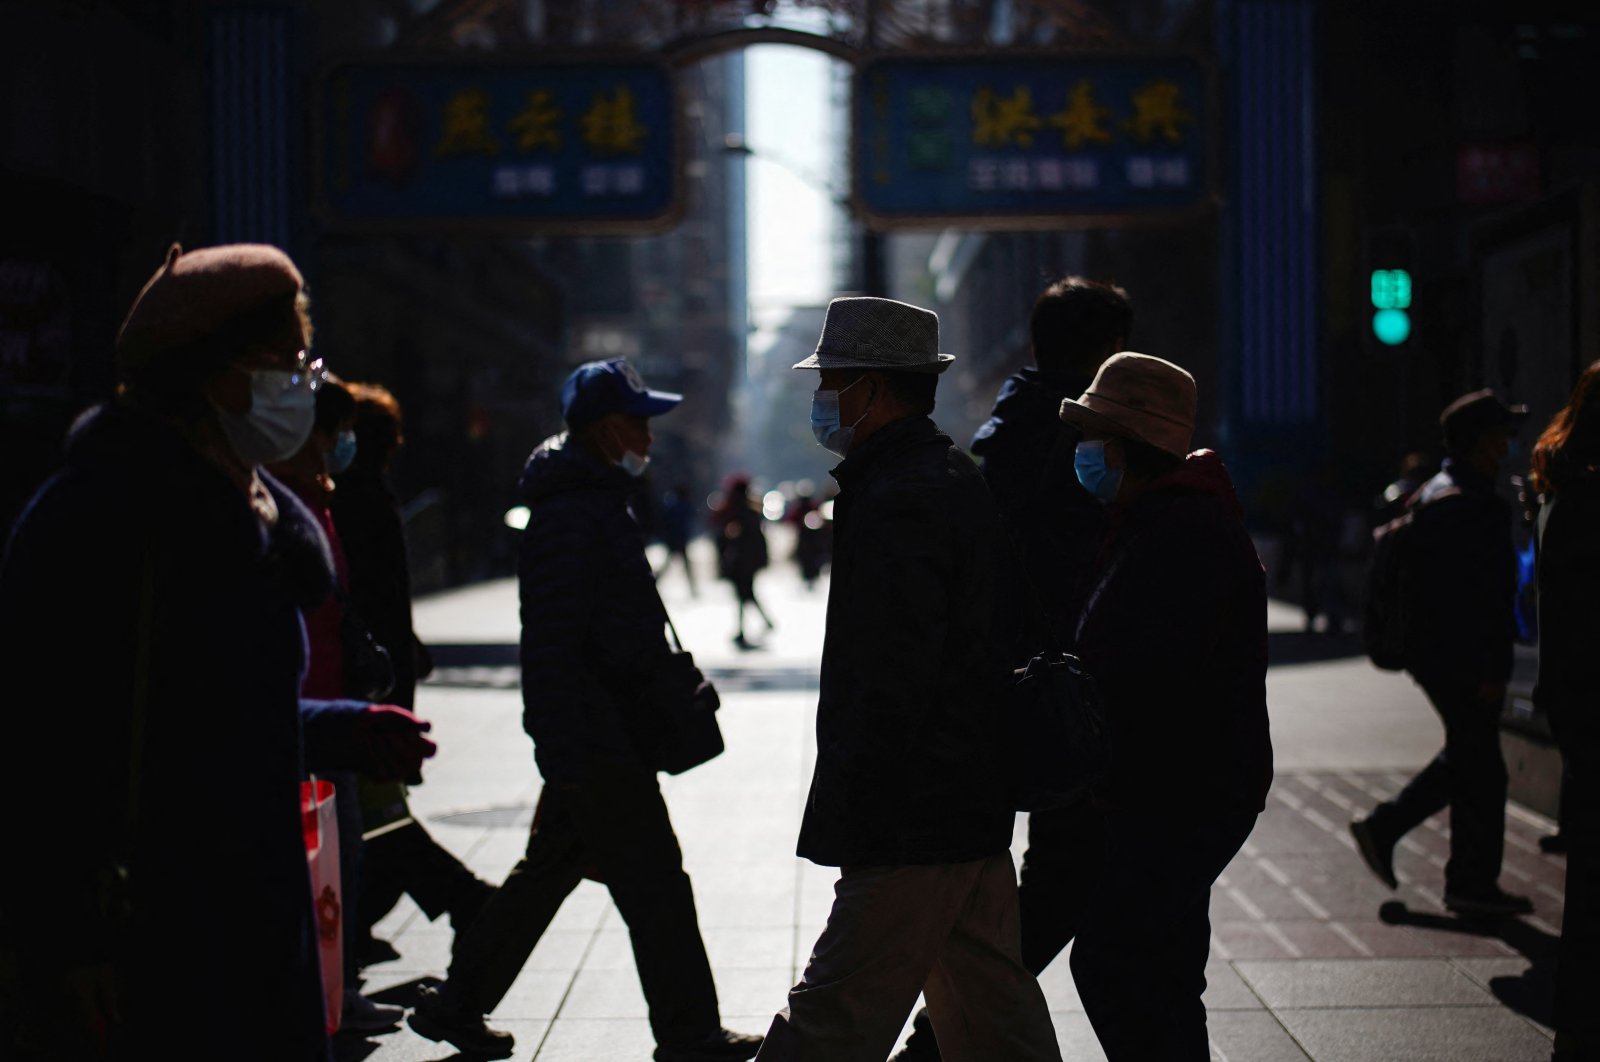 People wearing protective masks walk on a street, Shanghai, China, Dec. 20, 2021. (Reuters Photo)